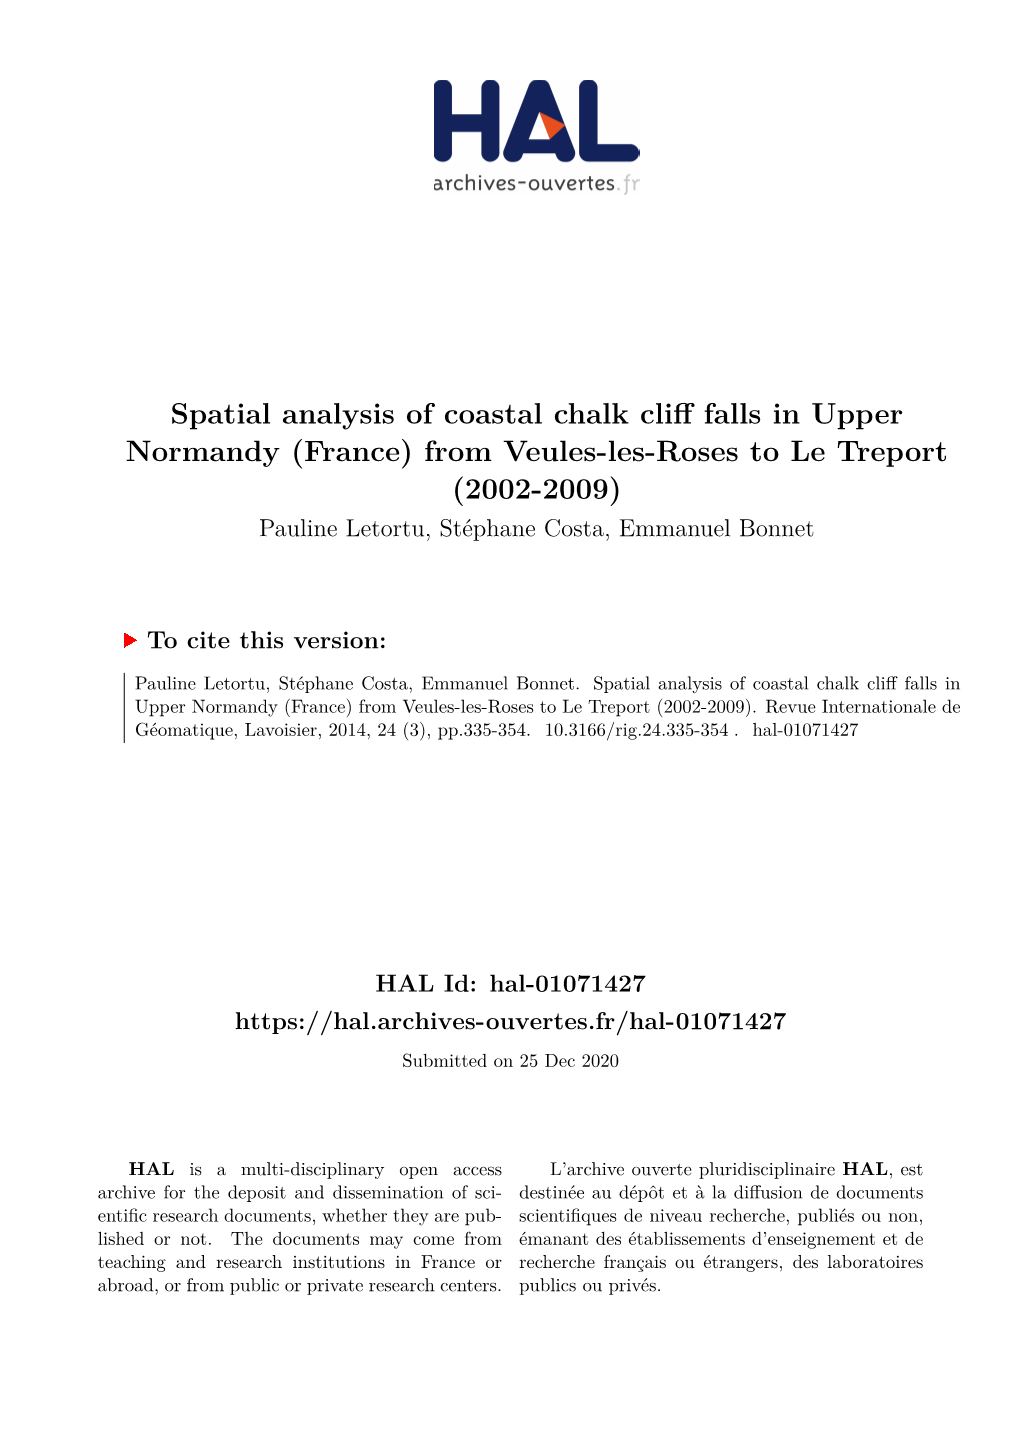 Spatial Analysis of Coastal Chalk Cliff Falls in Upper Normandy